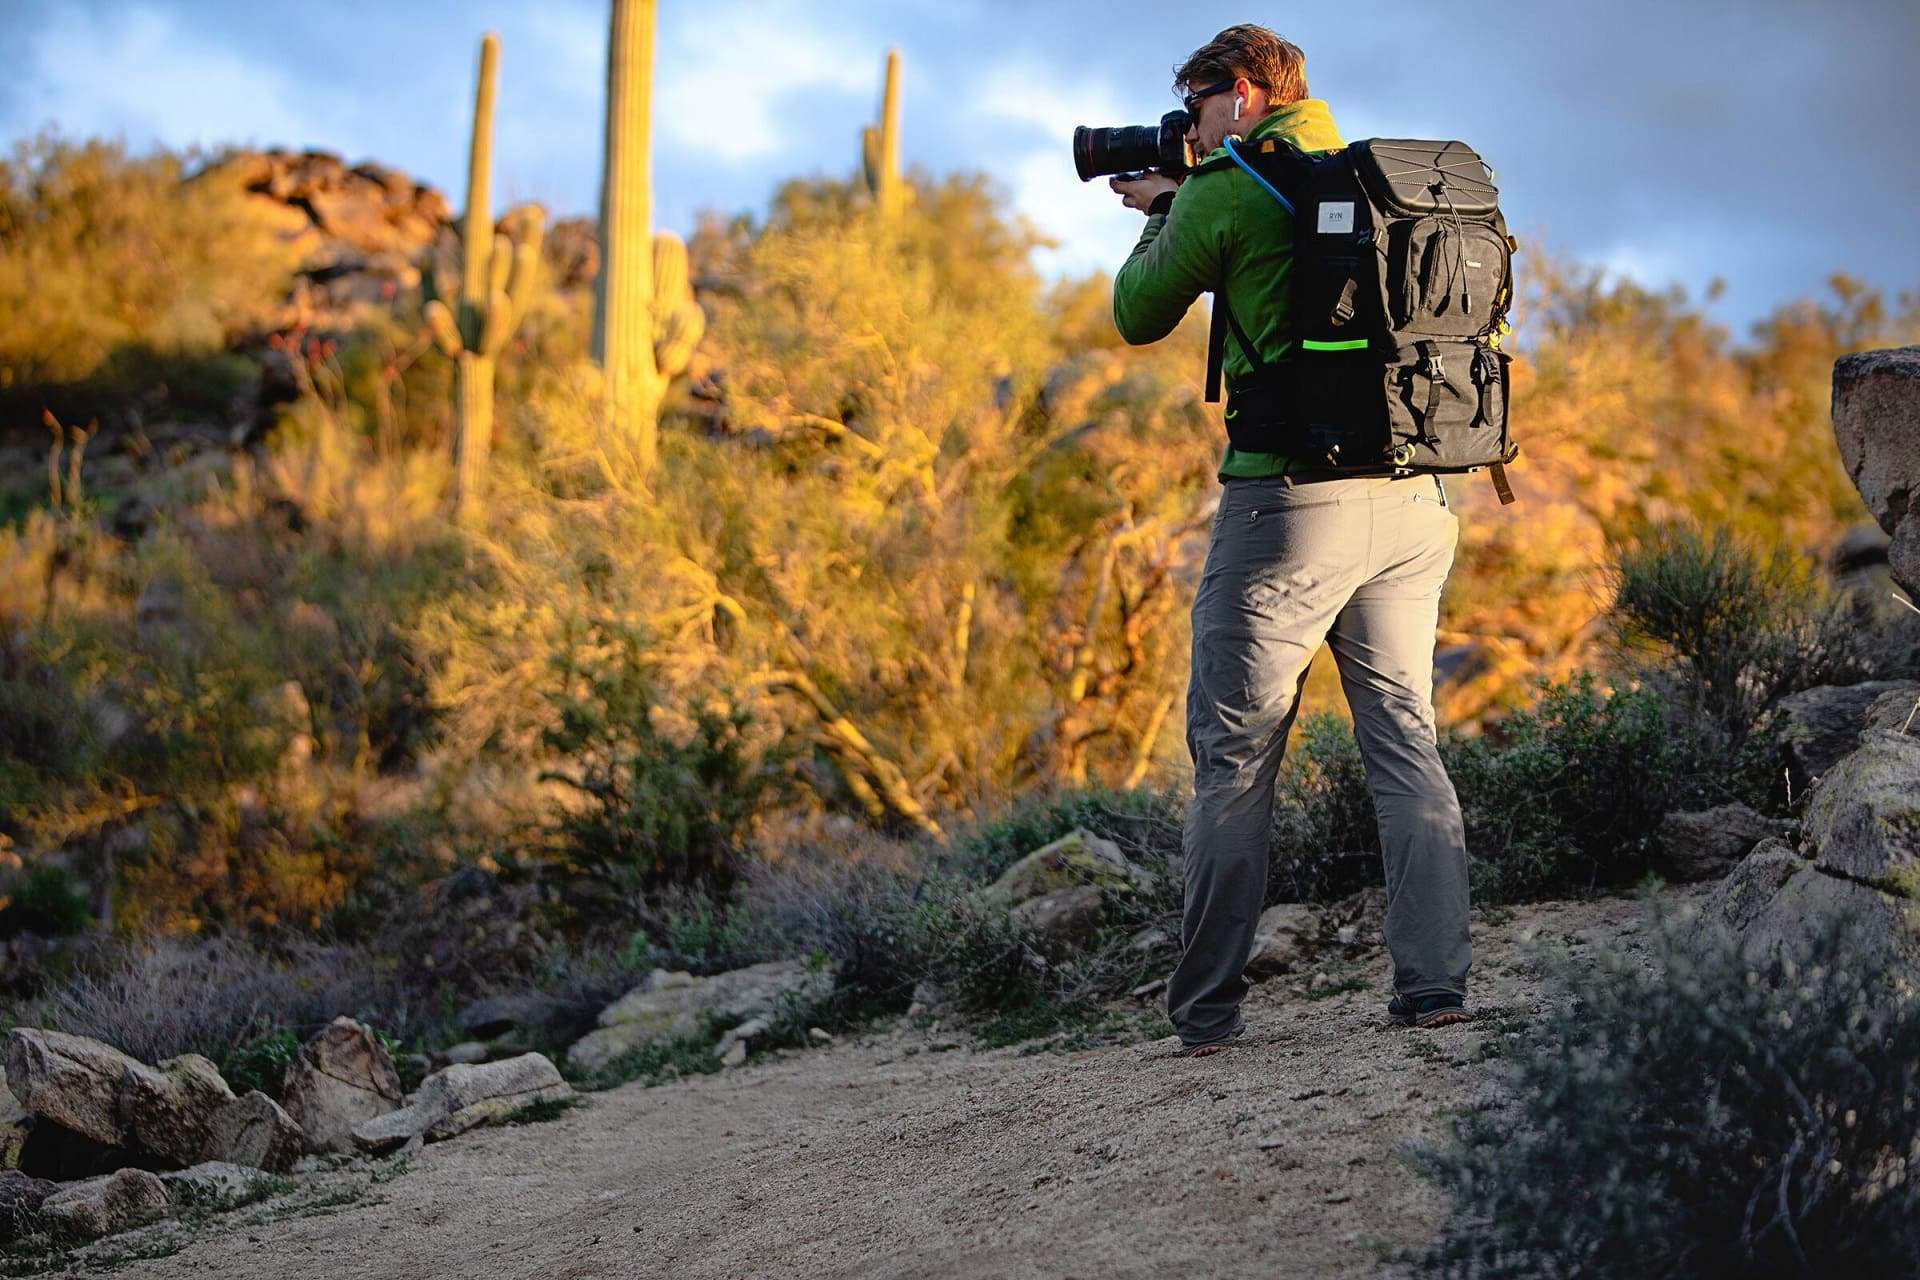 The Best Cameras for Hiking and Backpacking in 2022